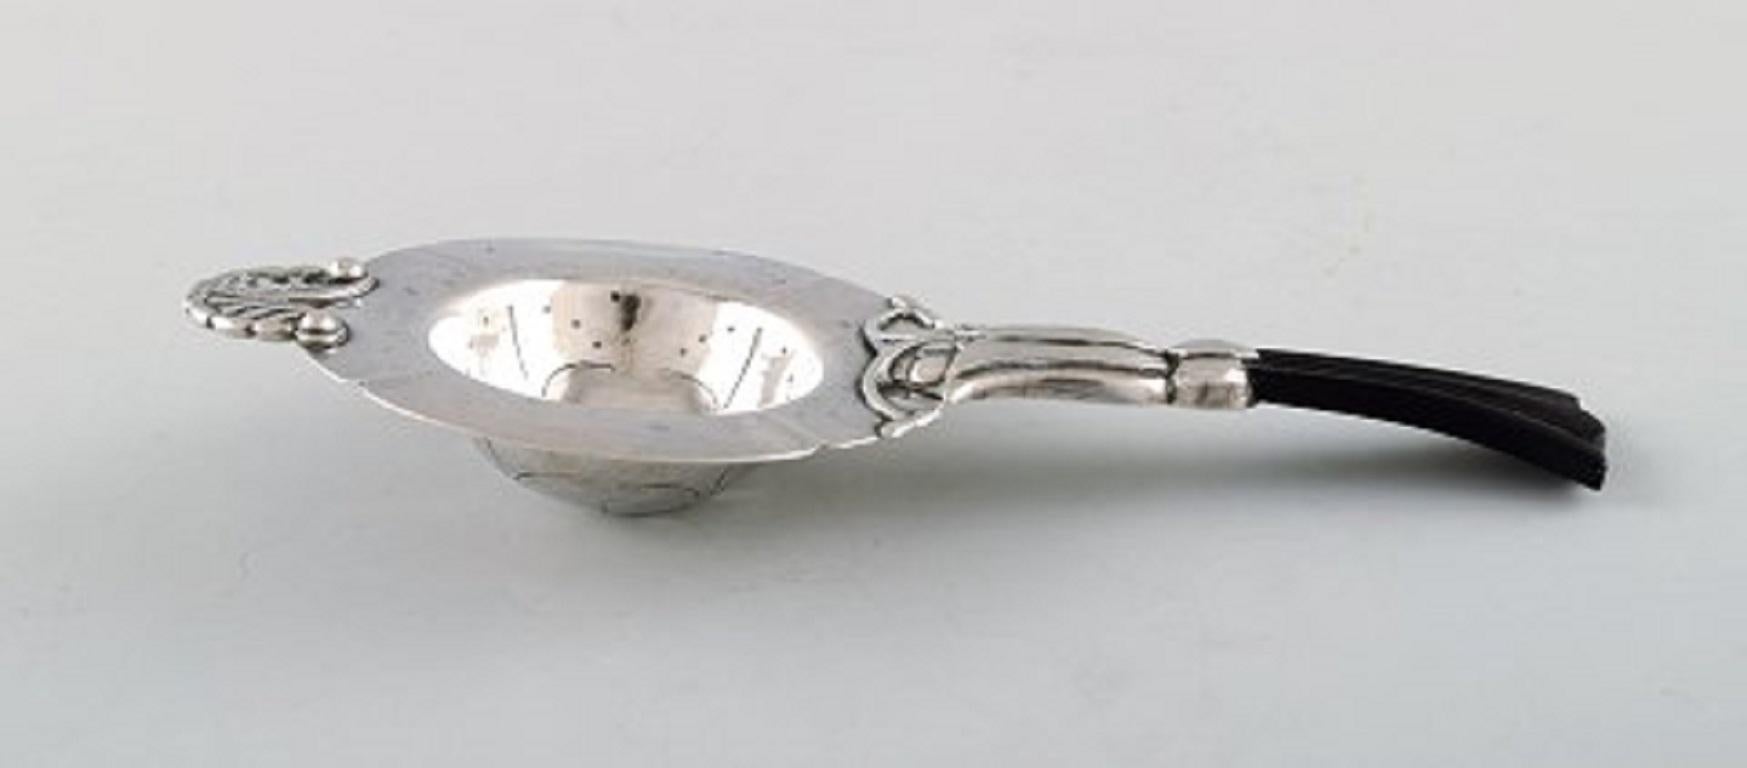 Early and Rare Art Nouveau Georg Jensen Tea Strainer in Silver with Ebony Handle 1